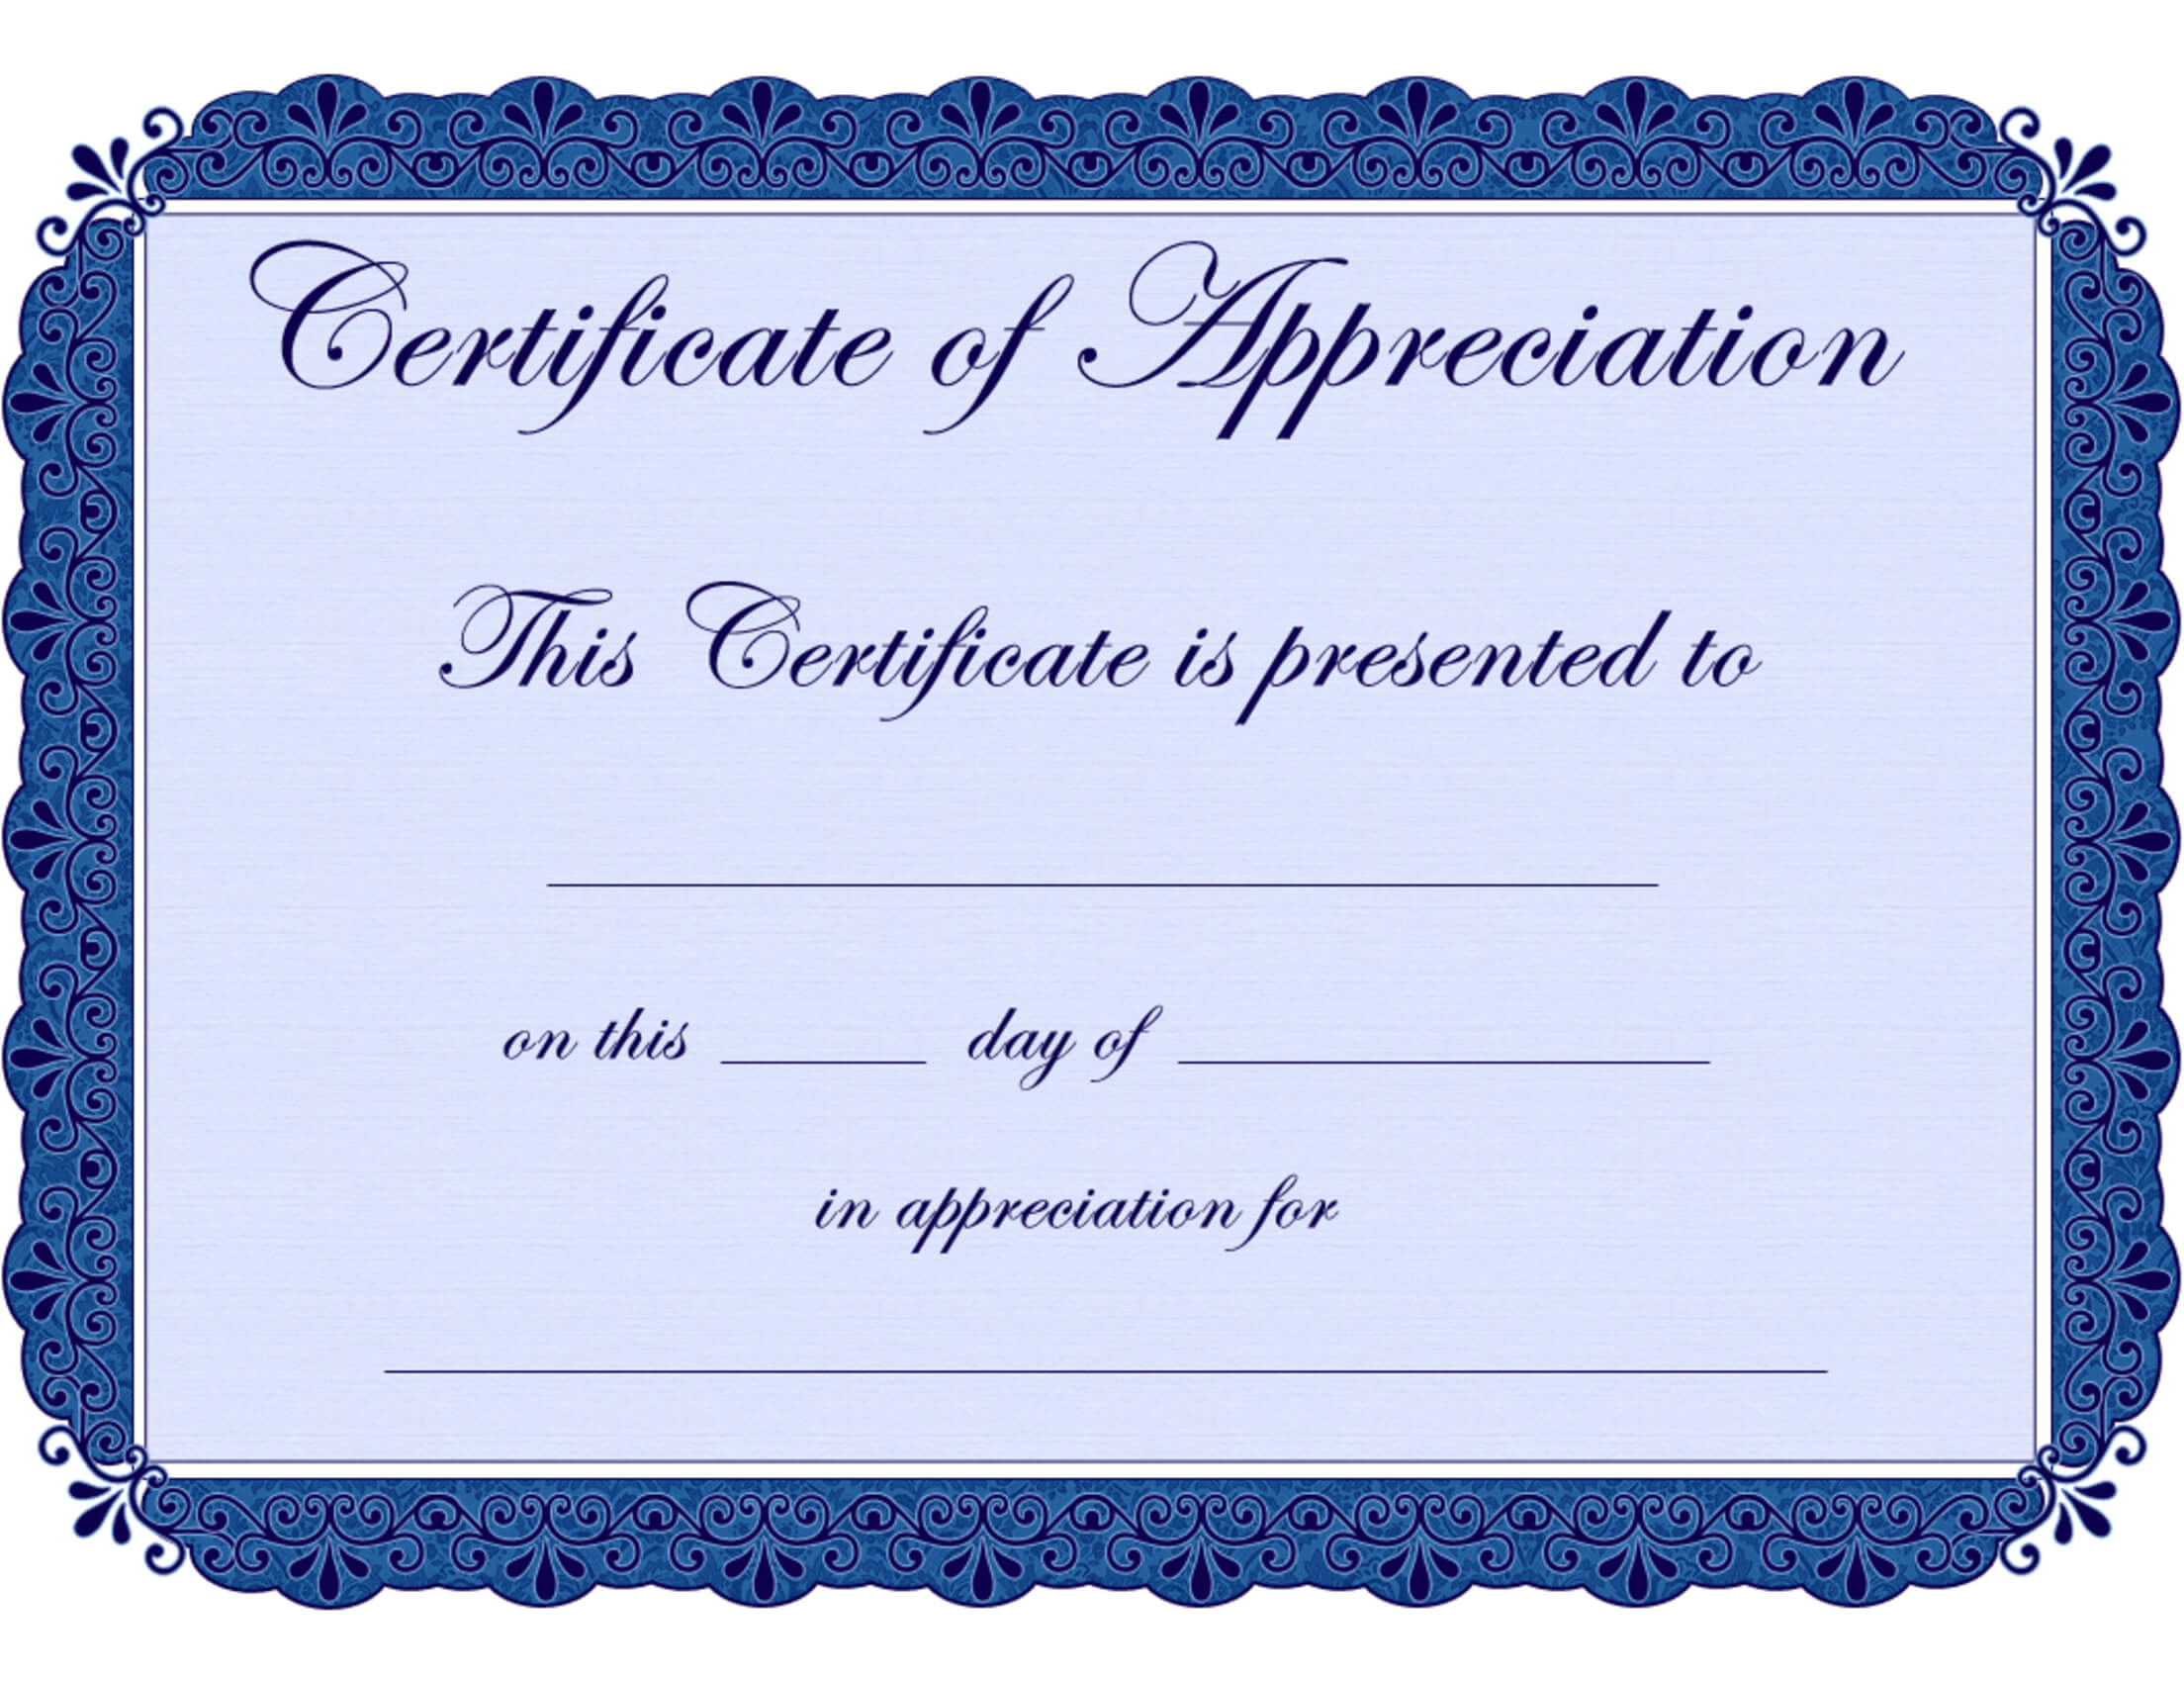 Free Printable Certificates Certificate Of Appreciation For Safety Recognition Certificate Template